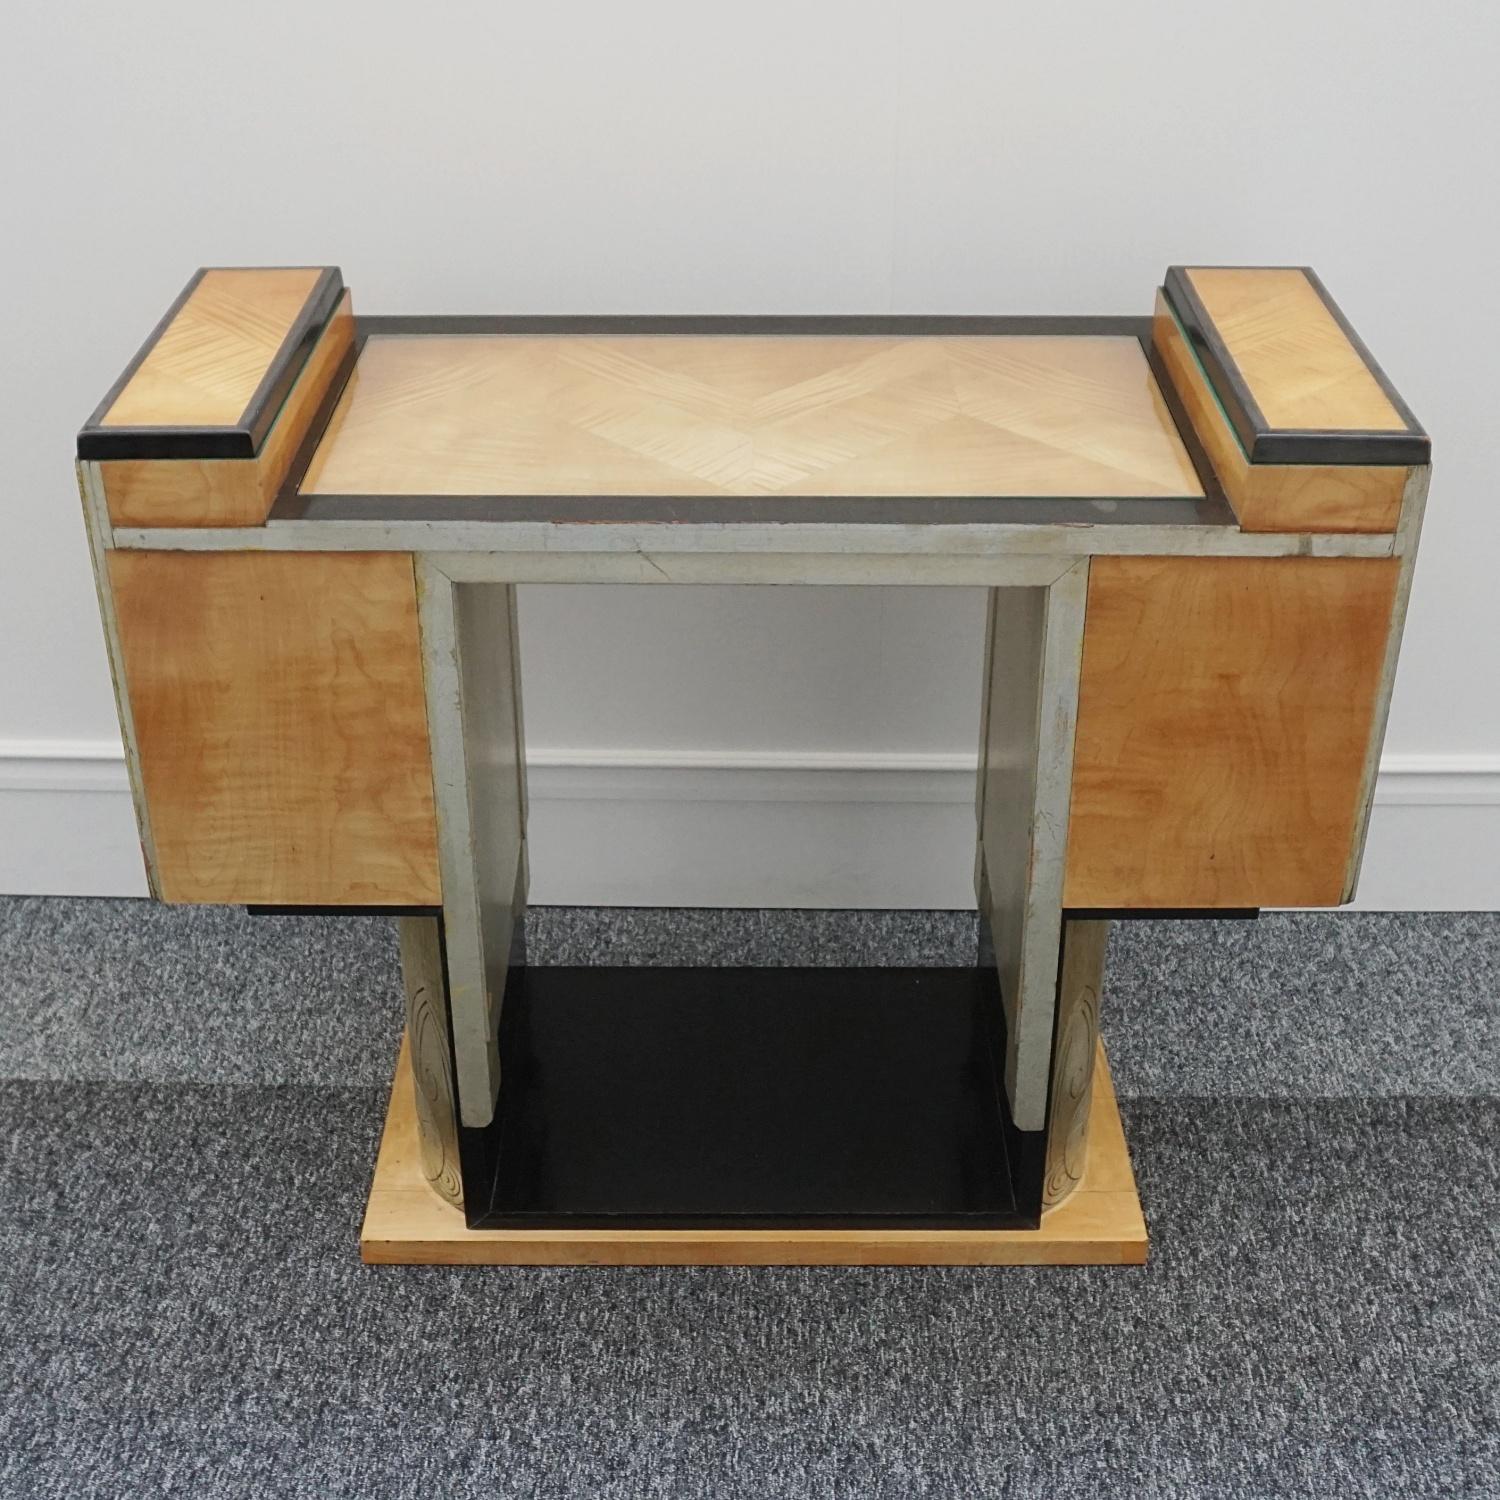 Art Deco Console Table by Serge Chermayeff for Waring & Gillows circa 1935 For Sale 11